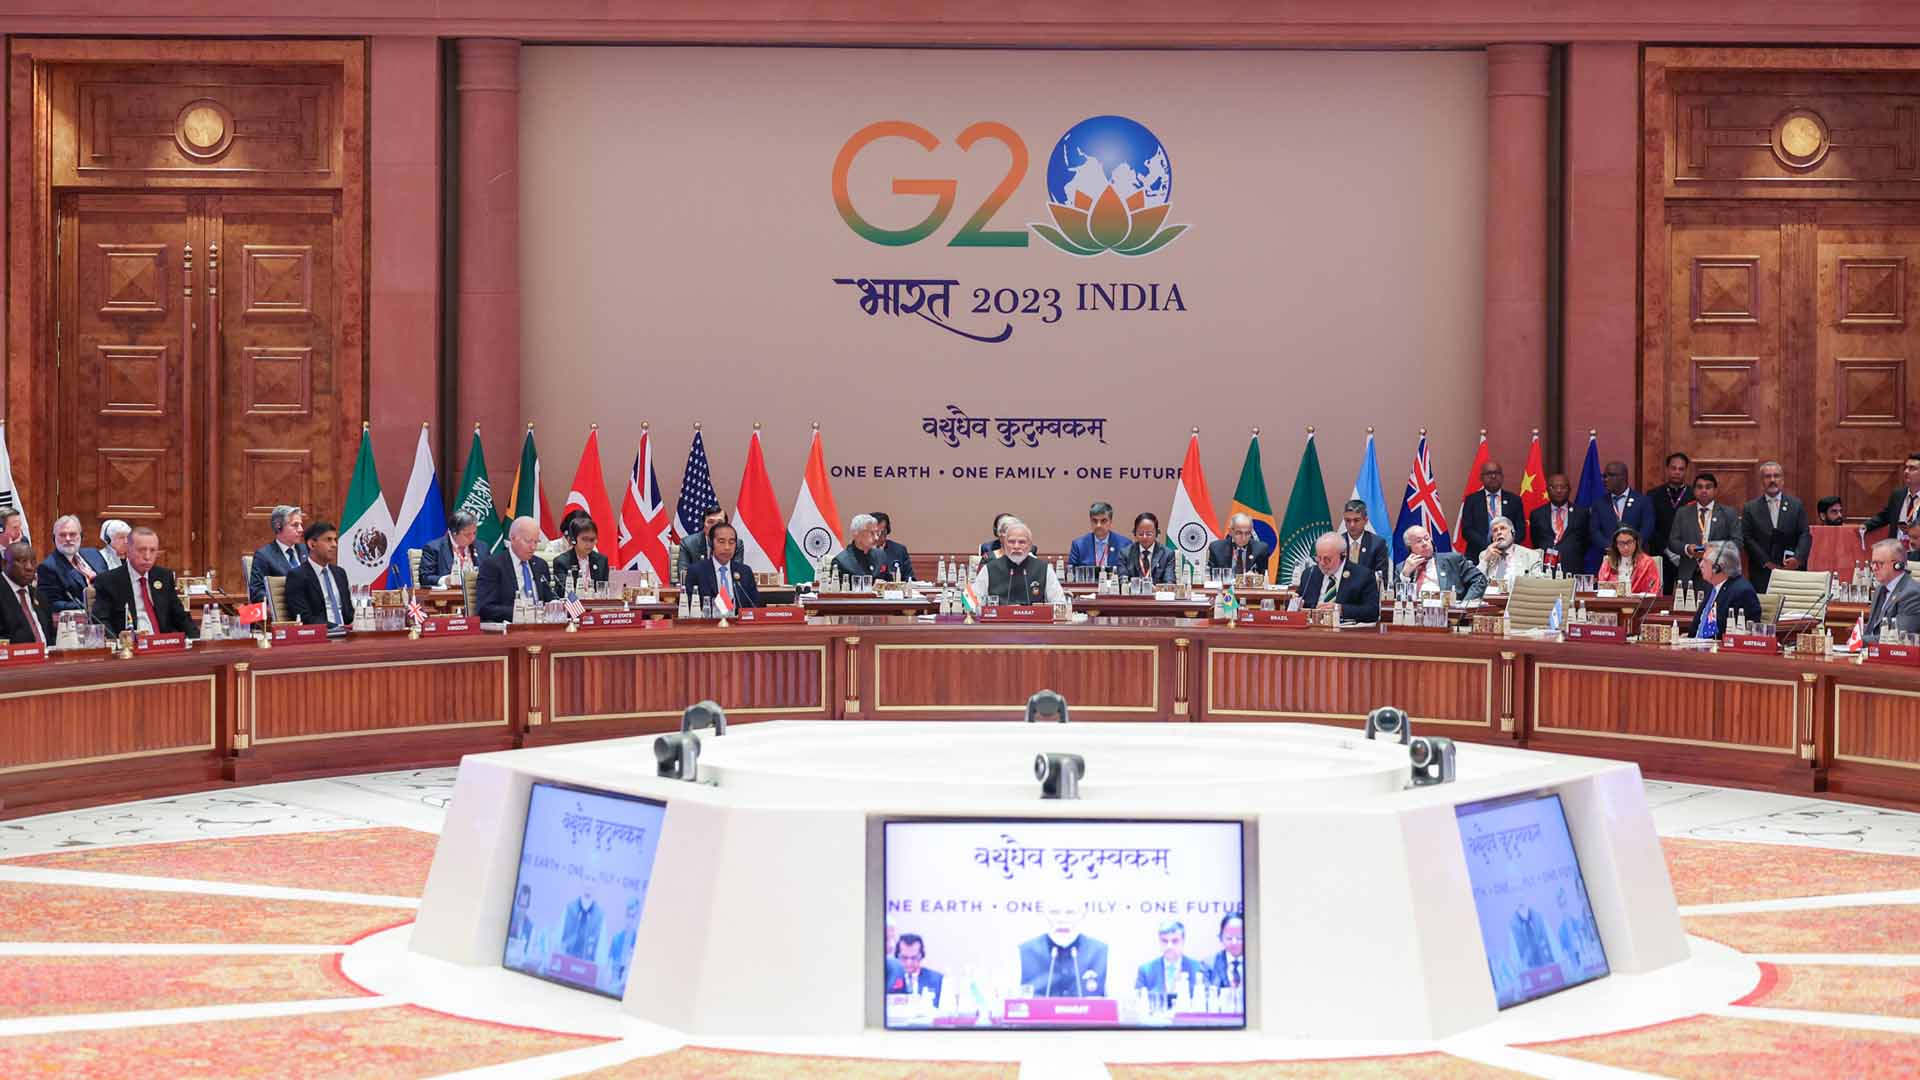 African Union Inducted into G20 on India's Initiative